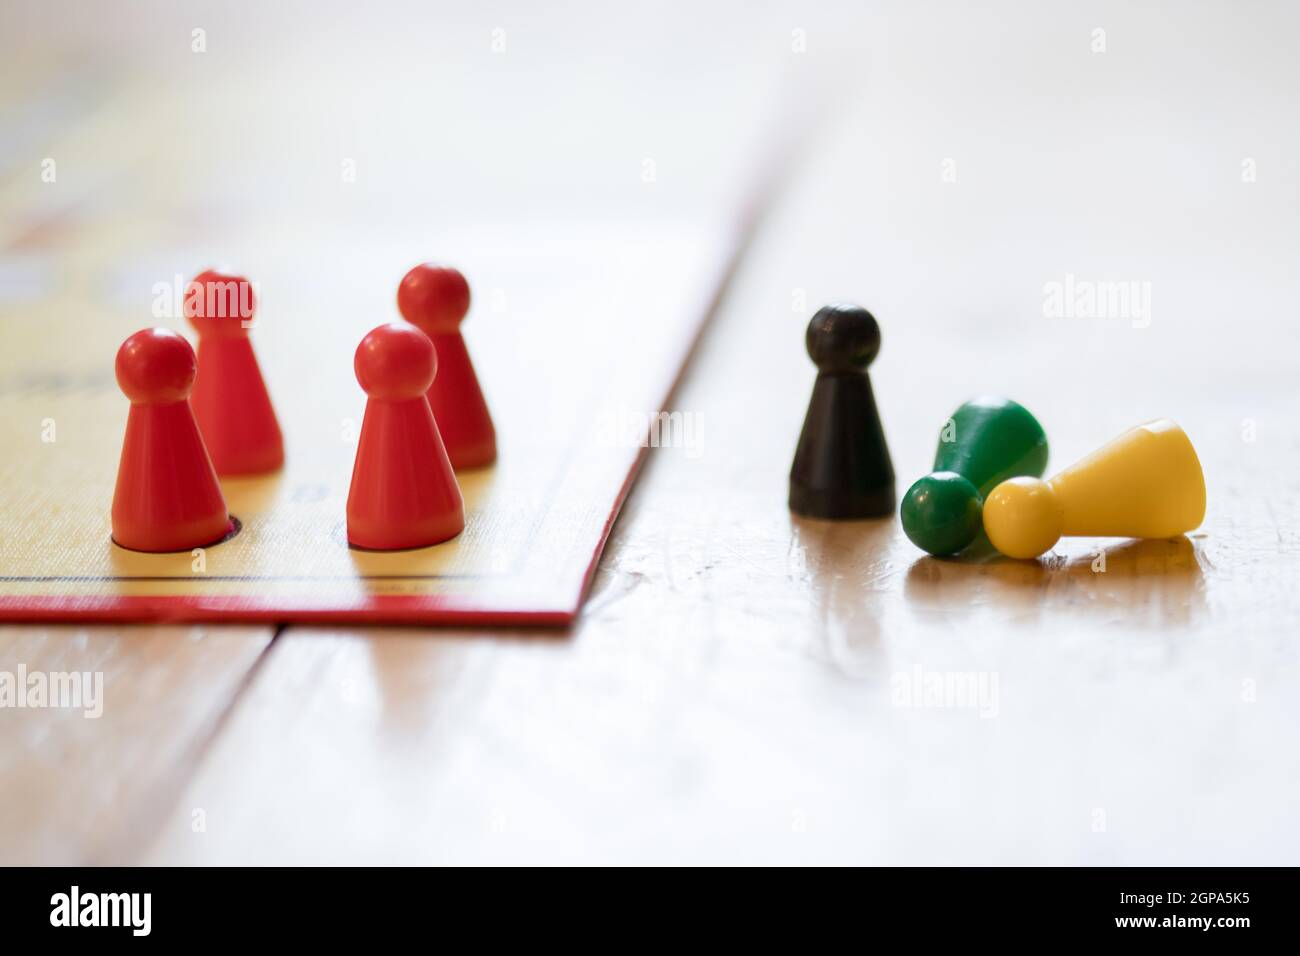 Meeples on a board, ready for playing a parlor game, ludo Stock Photo